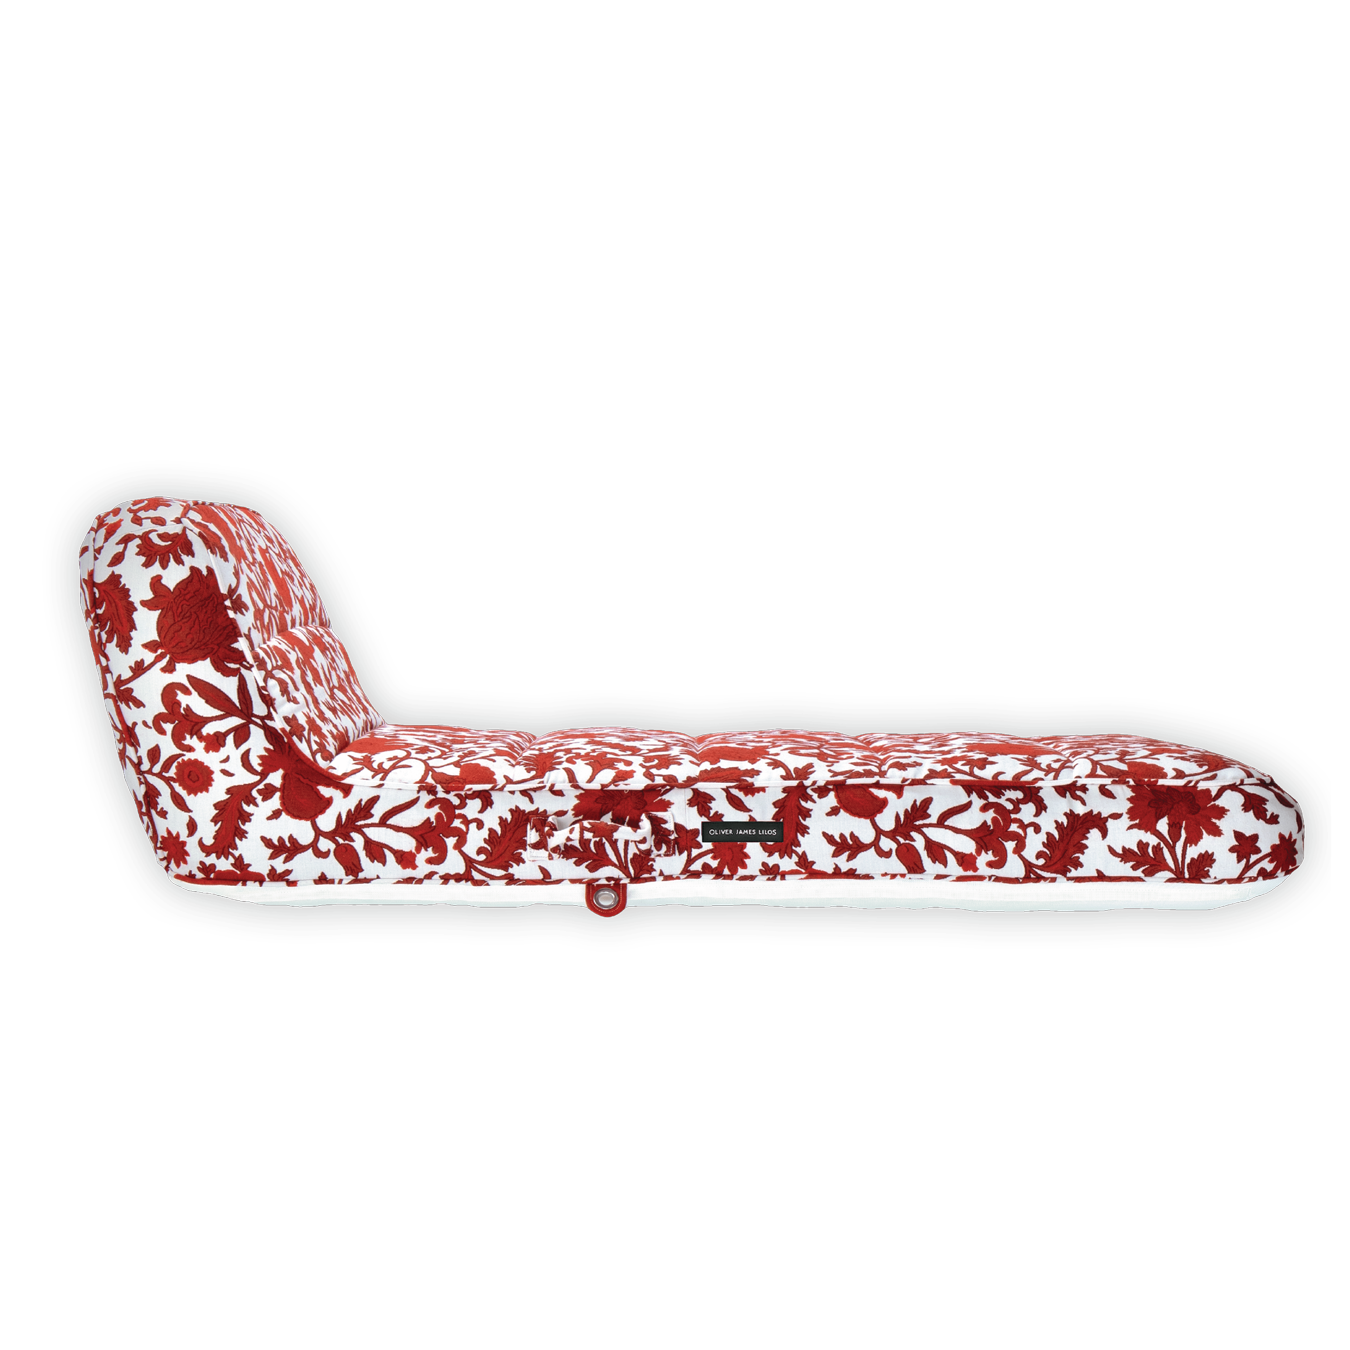 A cut-out image of a luxury pool float upholstered in red and white fabric.